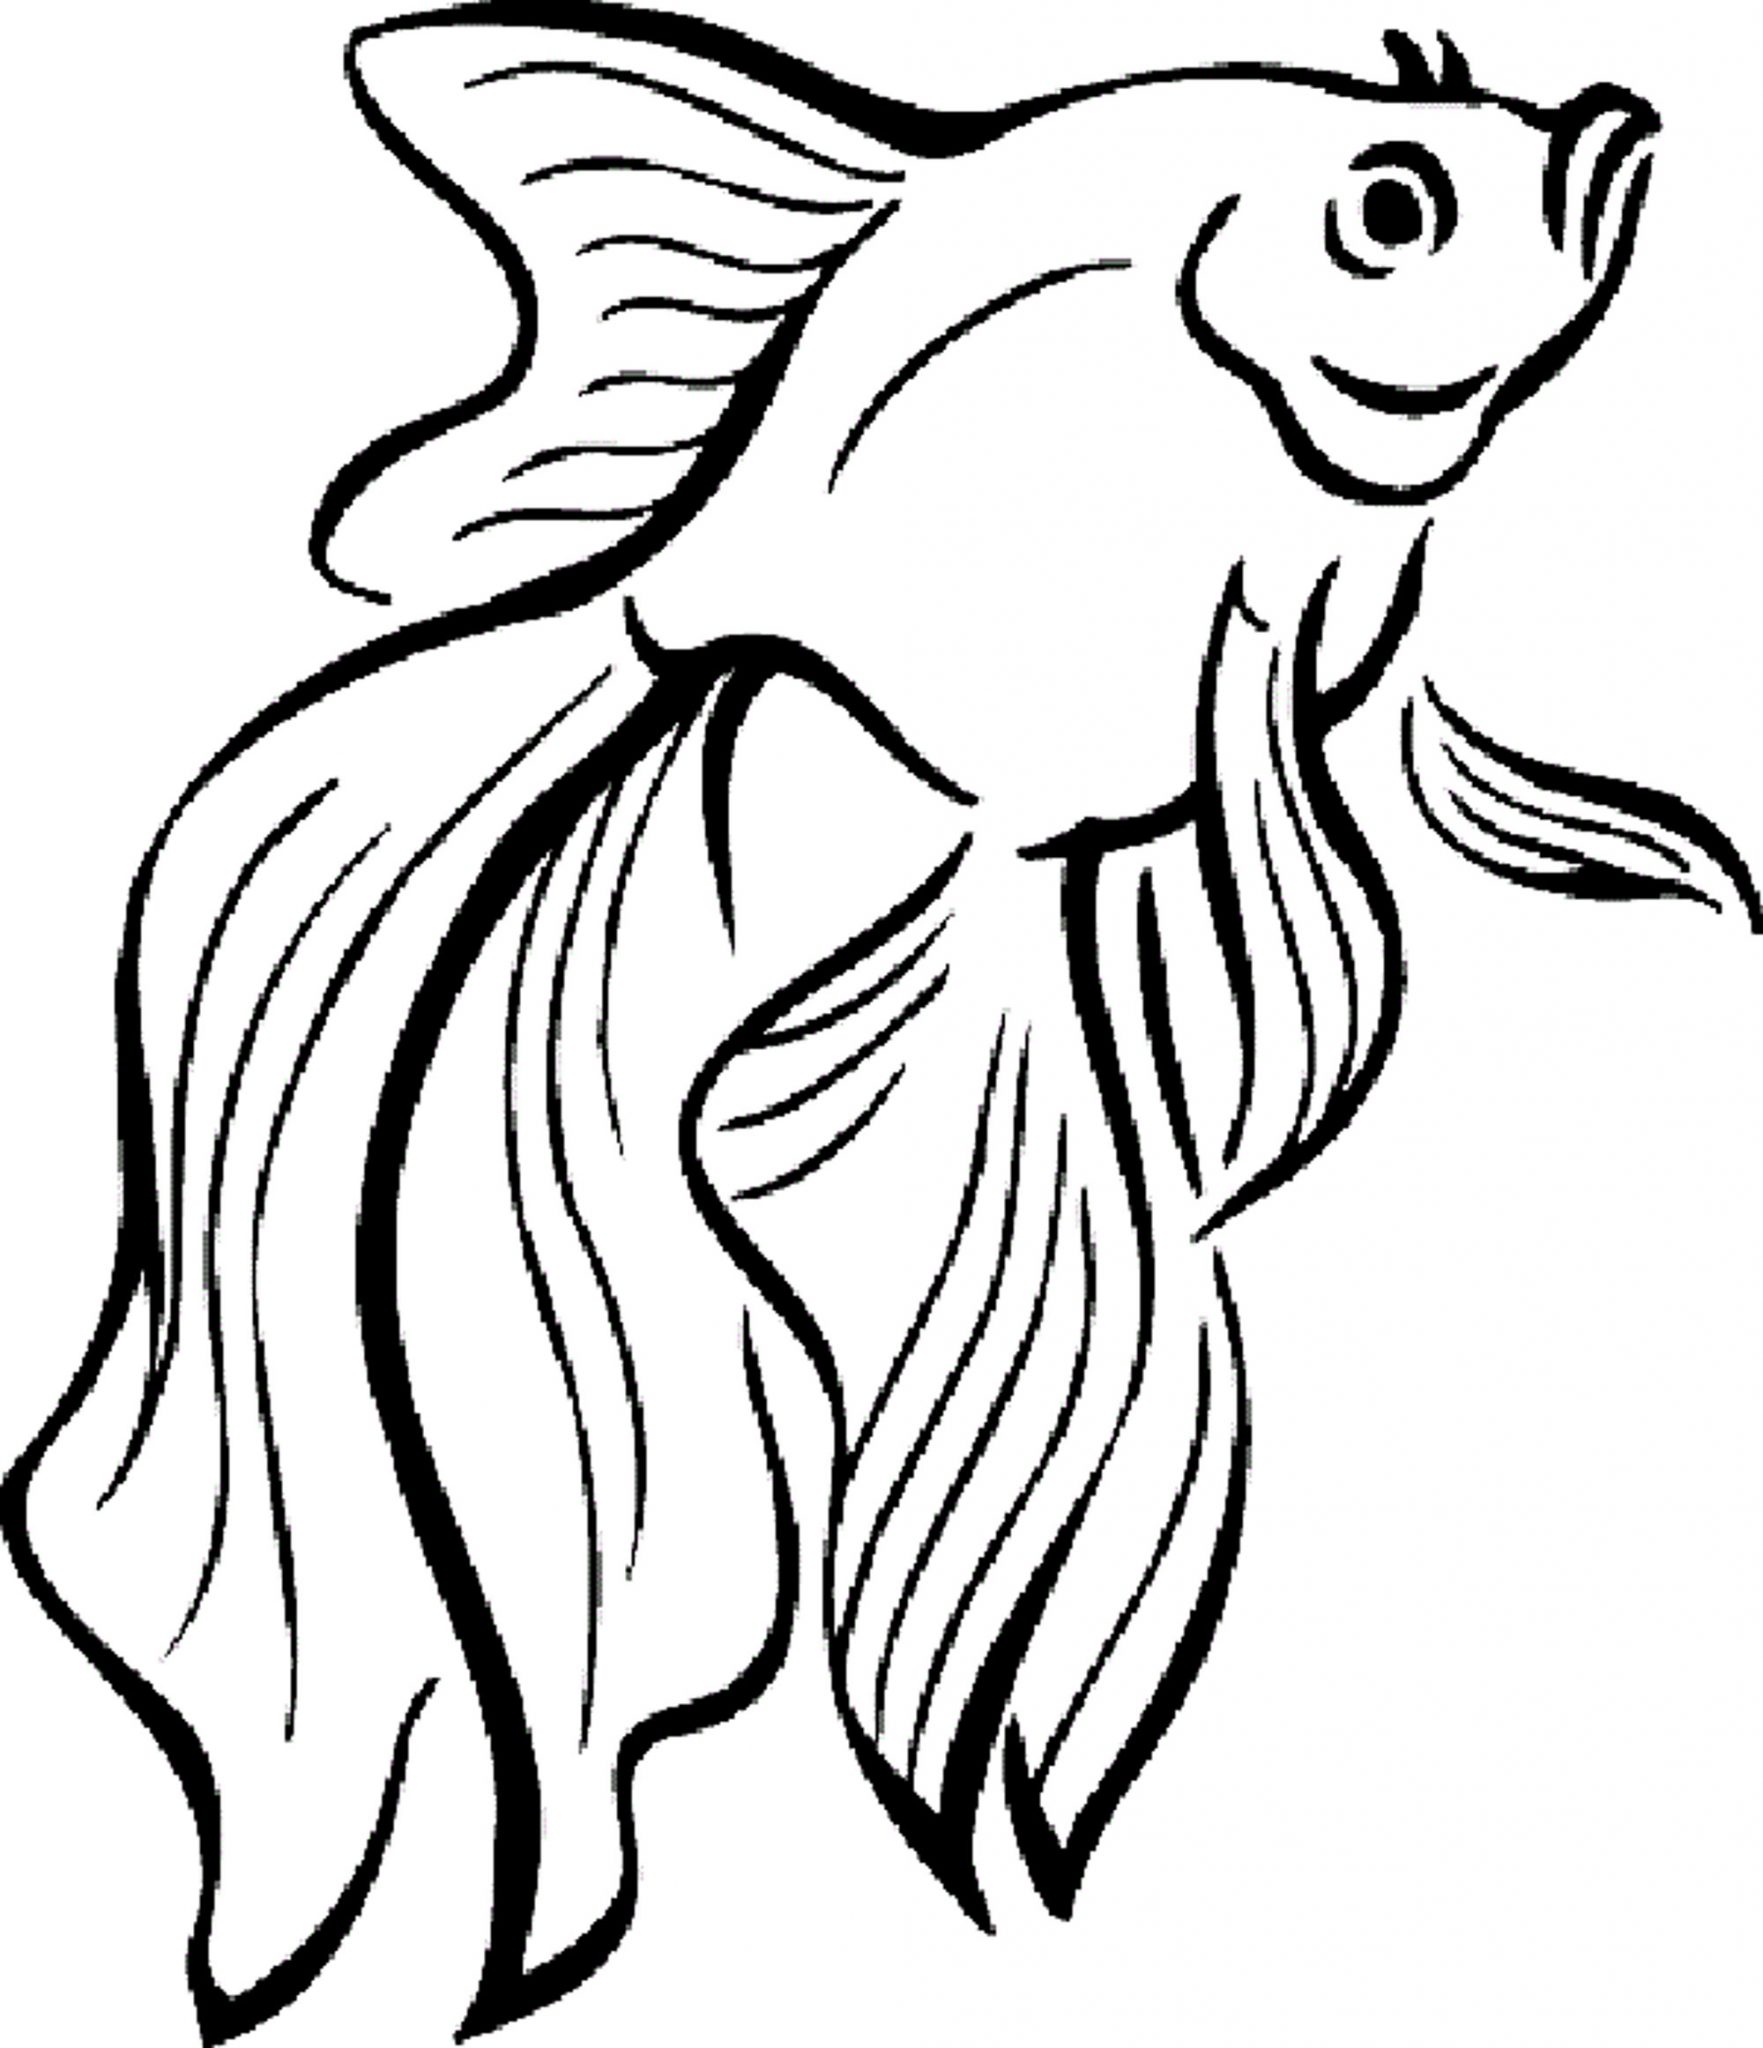 Cute and educational fish coloring page